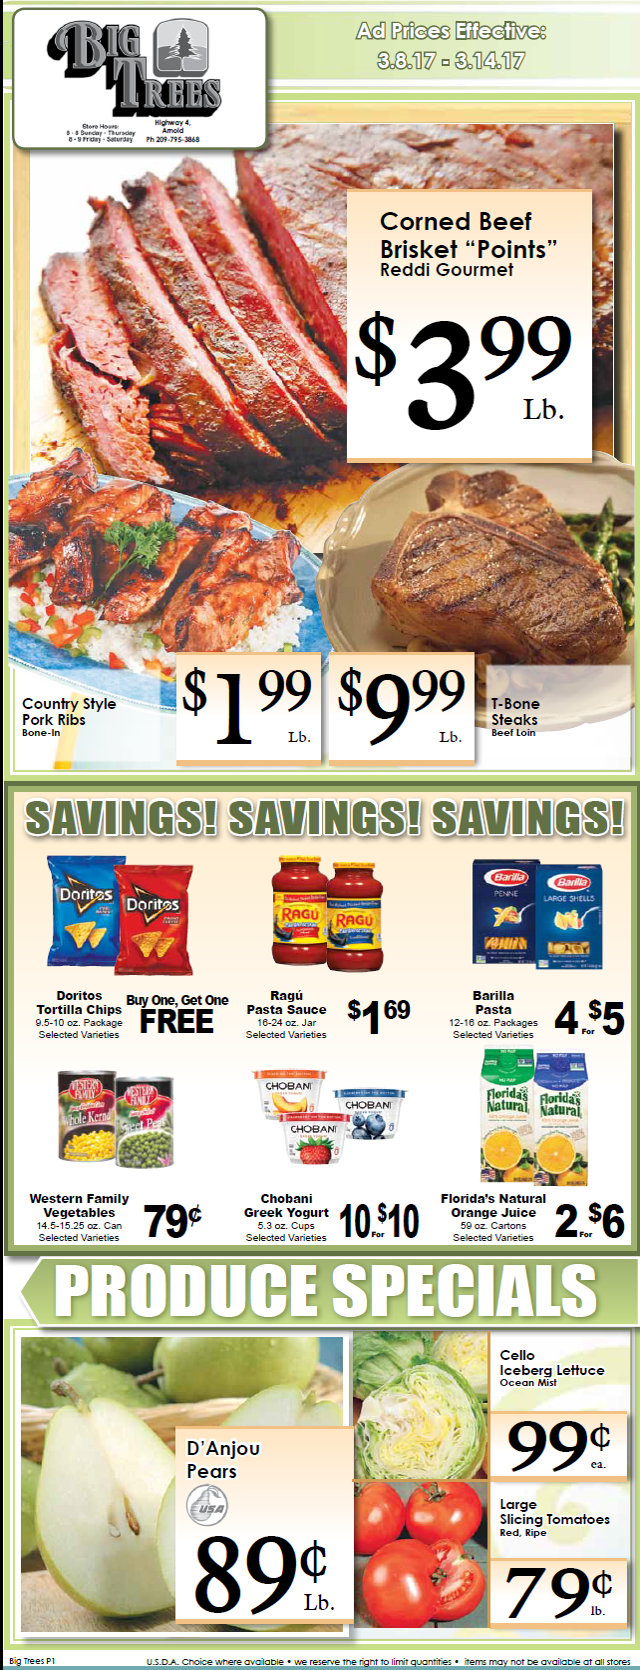 Big Trees Market Weekly Ad & Specials Through March 14th